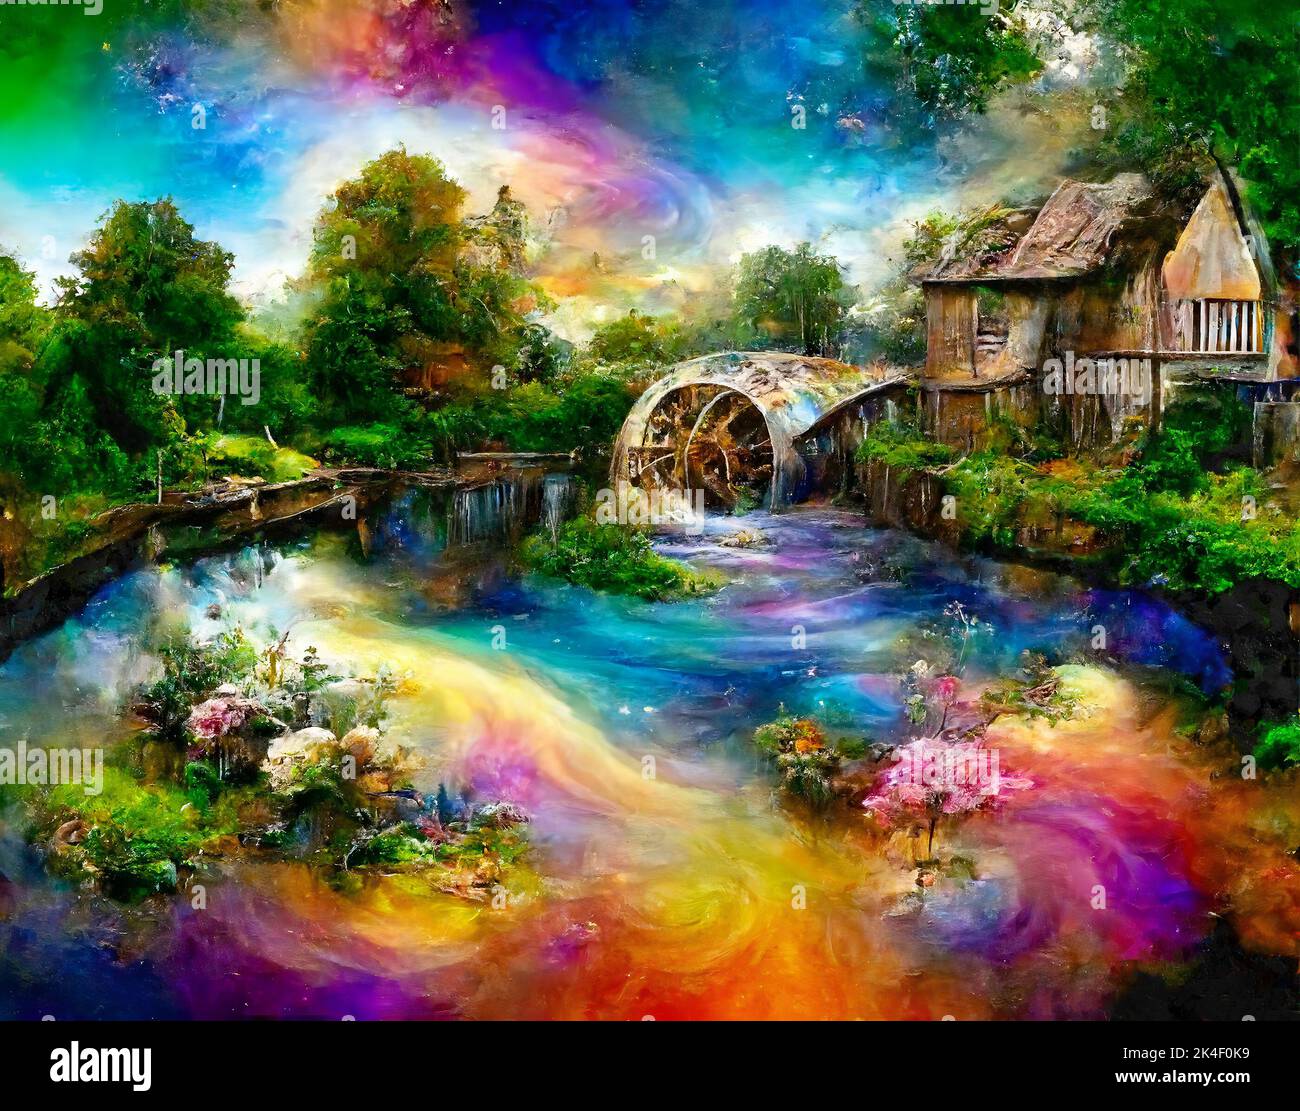 Fantasy cottage in summertime landscape with rainbow and butterflies. Art. Stock Photo